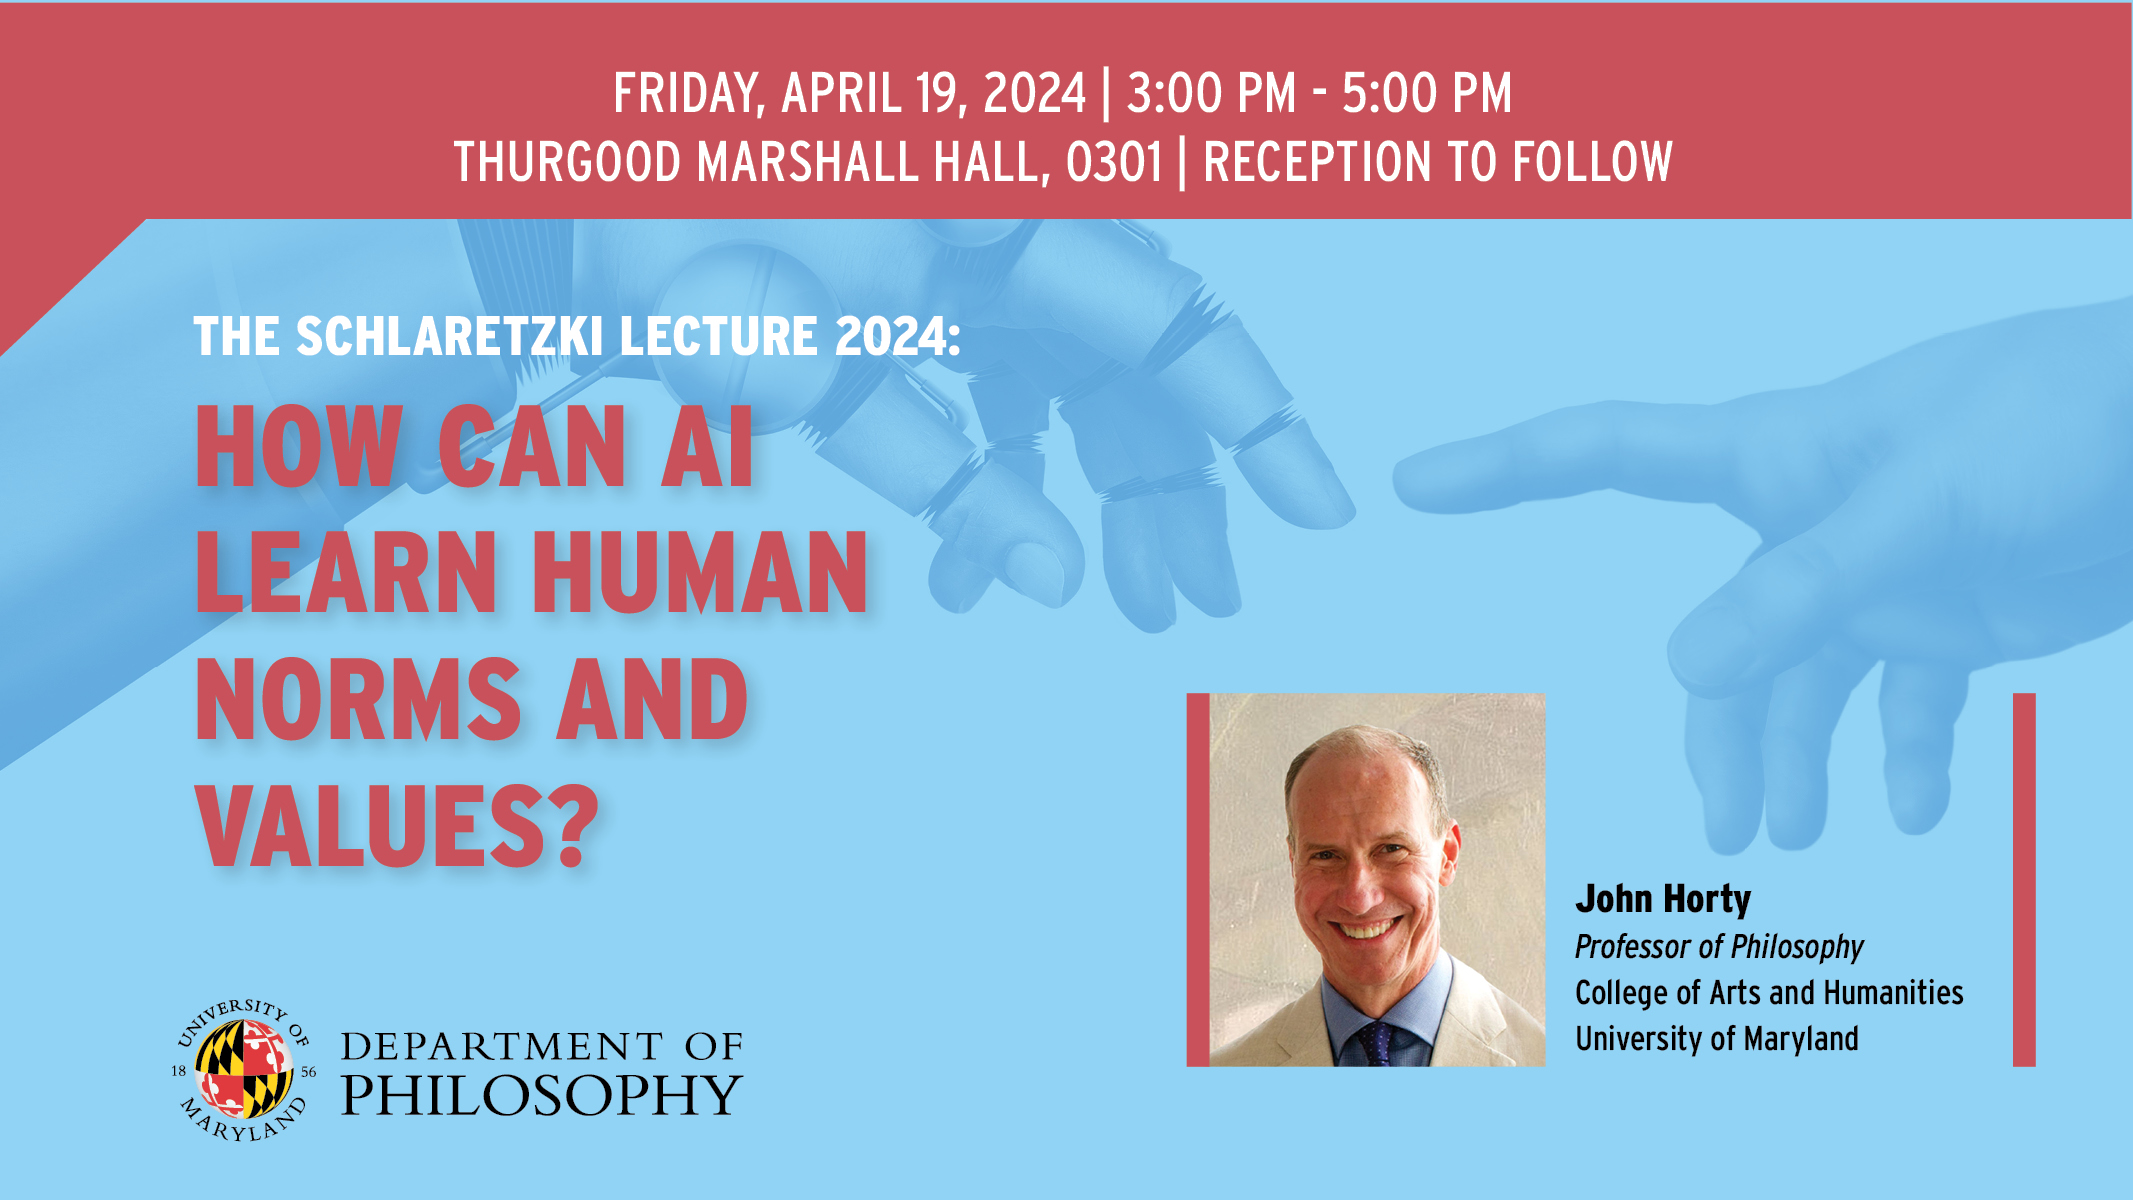  The Schlaretzki Lecture: John Horty | How can AI learn human norms and values?